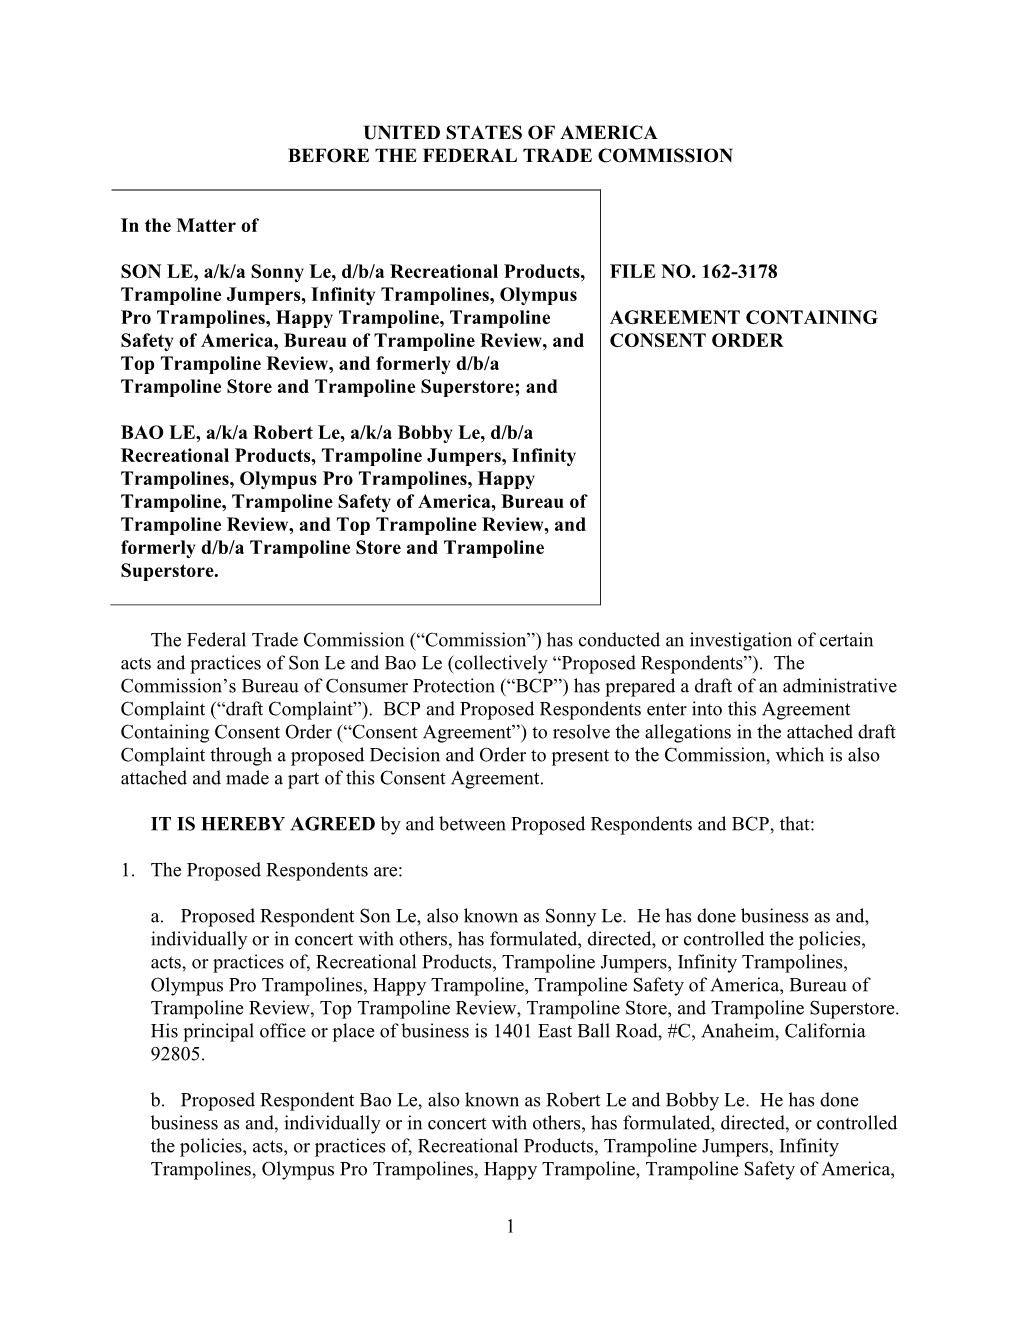 Agreement Containing Consent Order